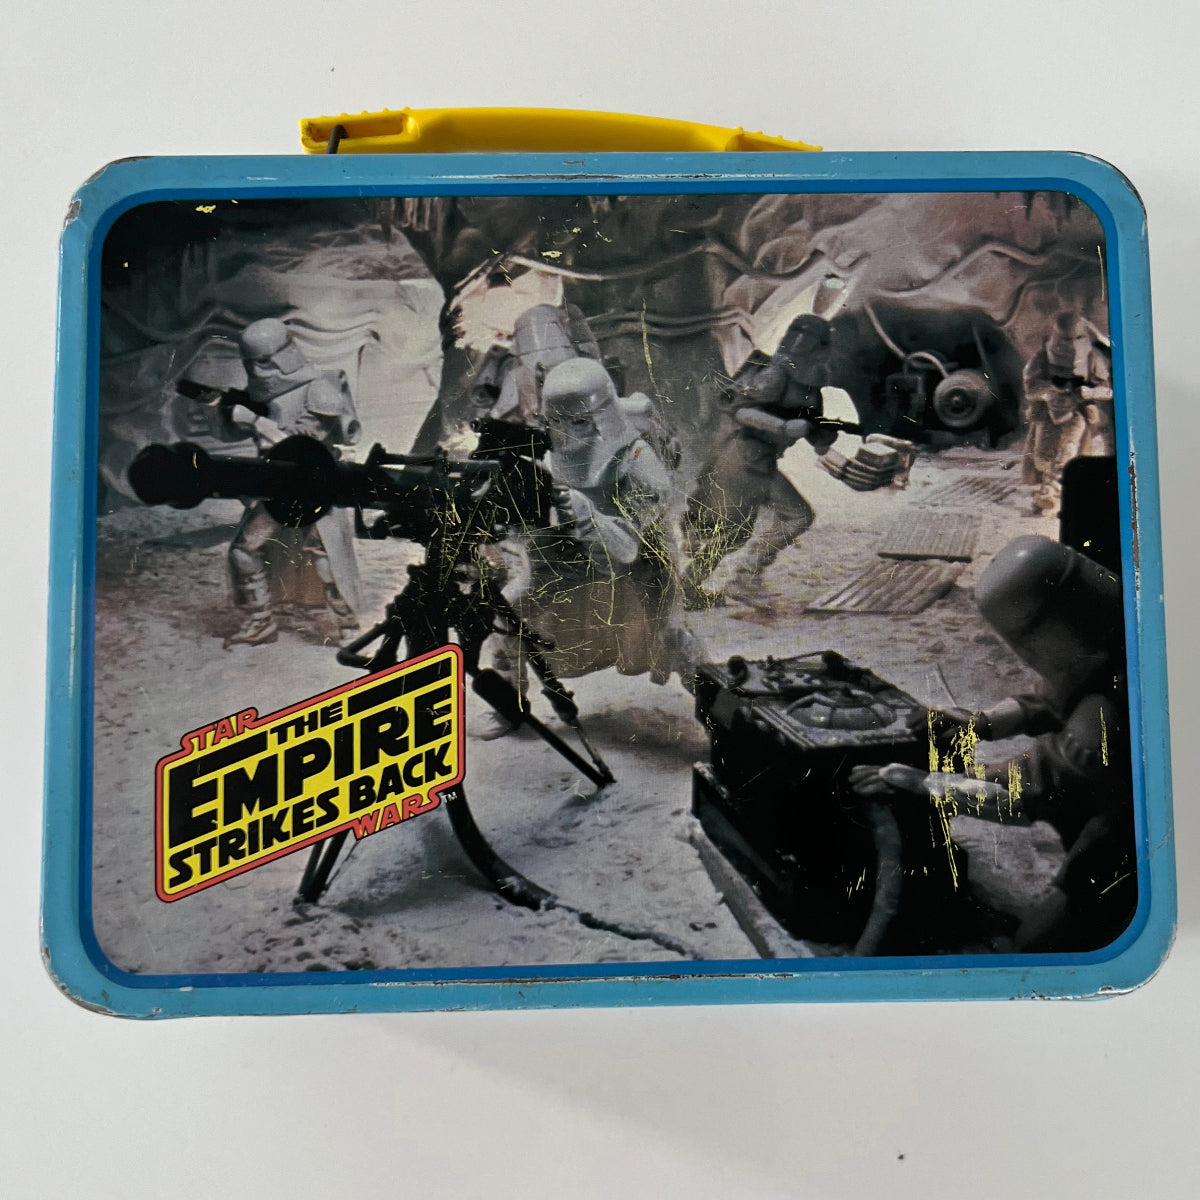 Vintage 1980 Star Wars Empire Strikes Back Lunchbox with Thermos